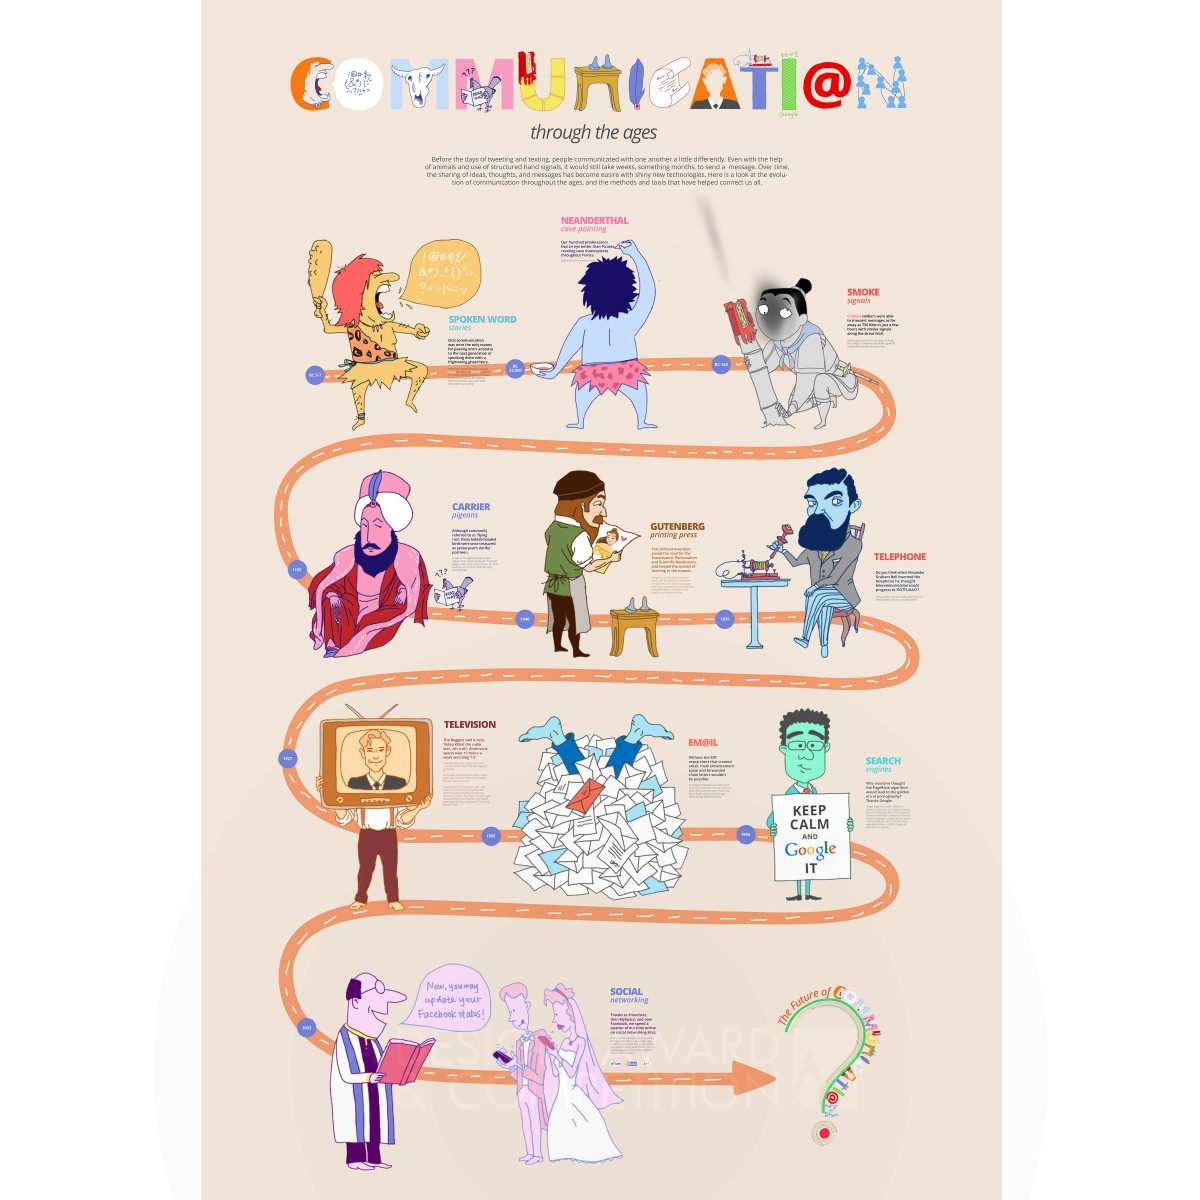 communication through the ages Parallax scrolling website